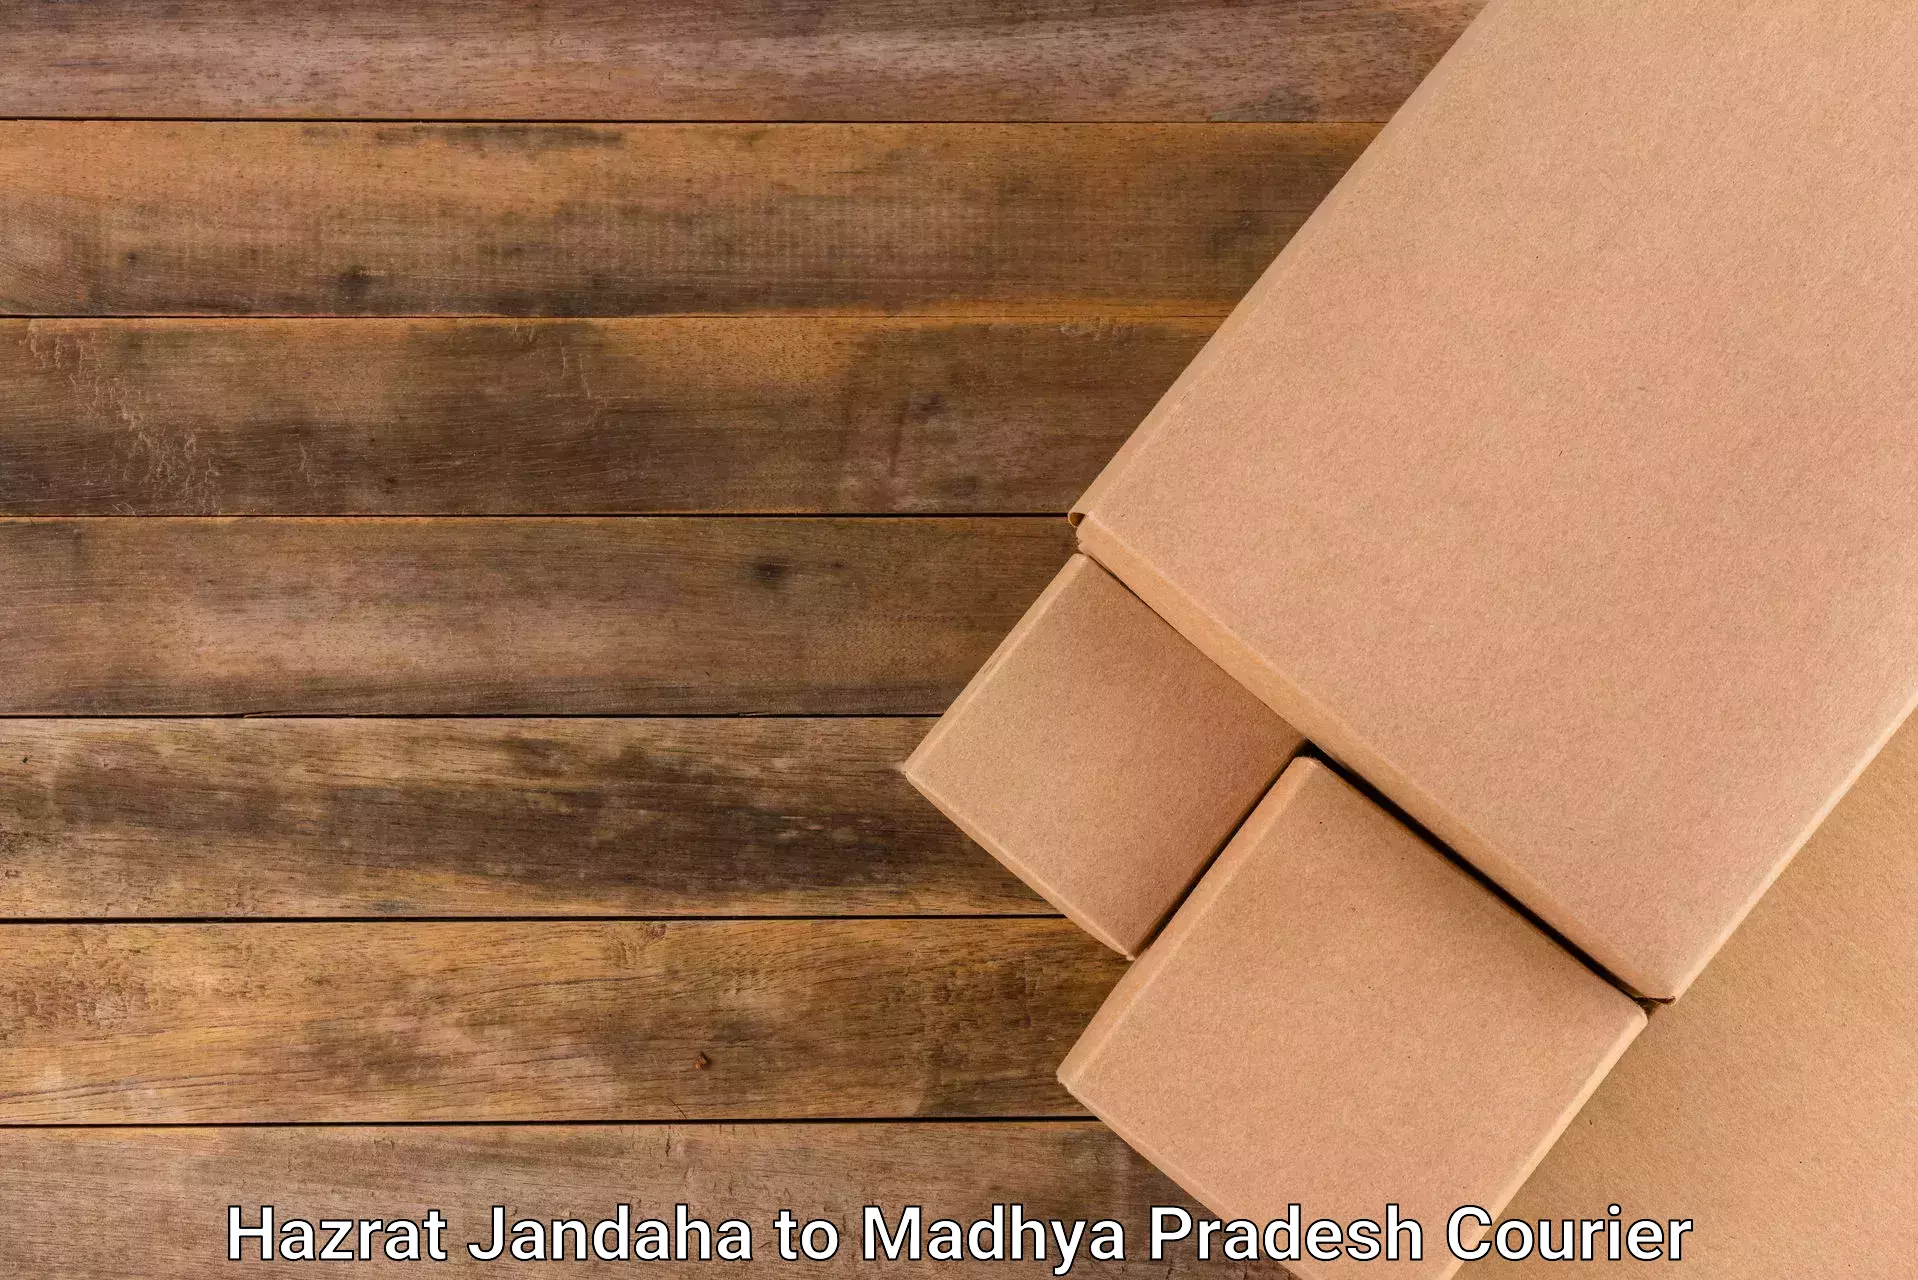 Professional courier services in Hazrat Jandaha to Pachore